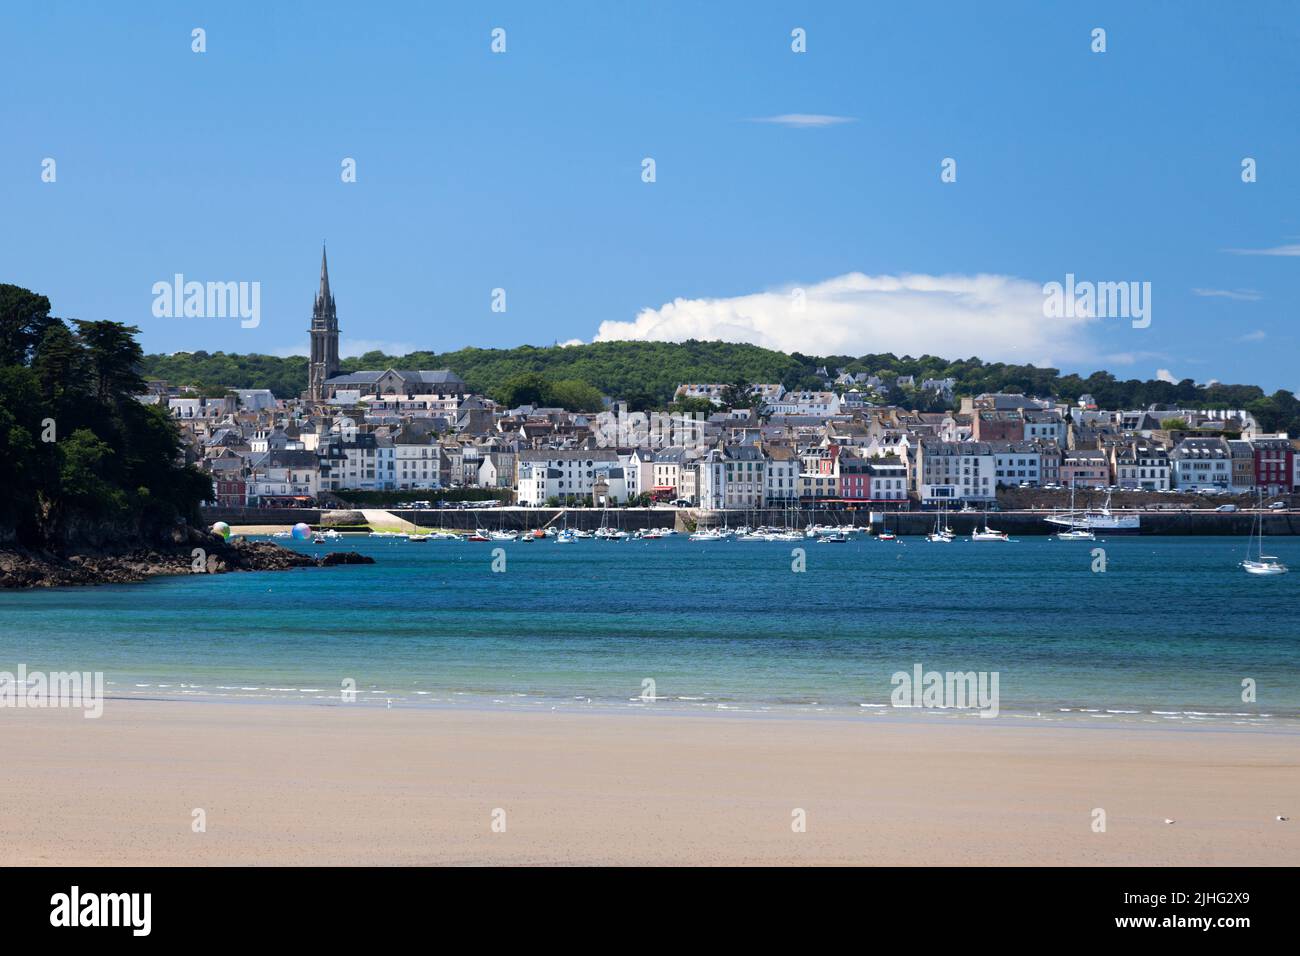 Ris beach with the Church of the Sacred Heart overlooking the town of Douarnenez in the background. Stock Photo